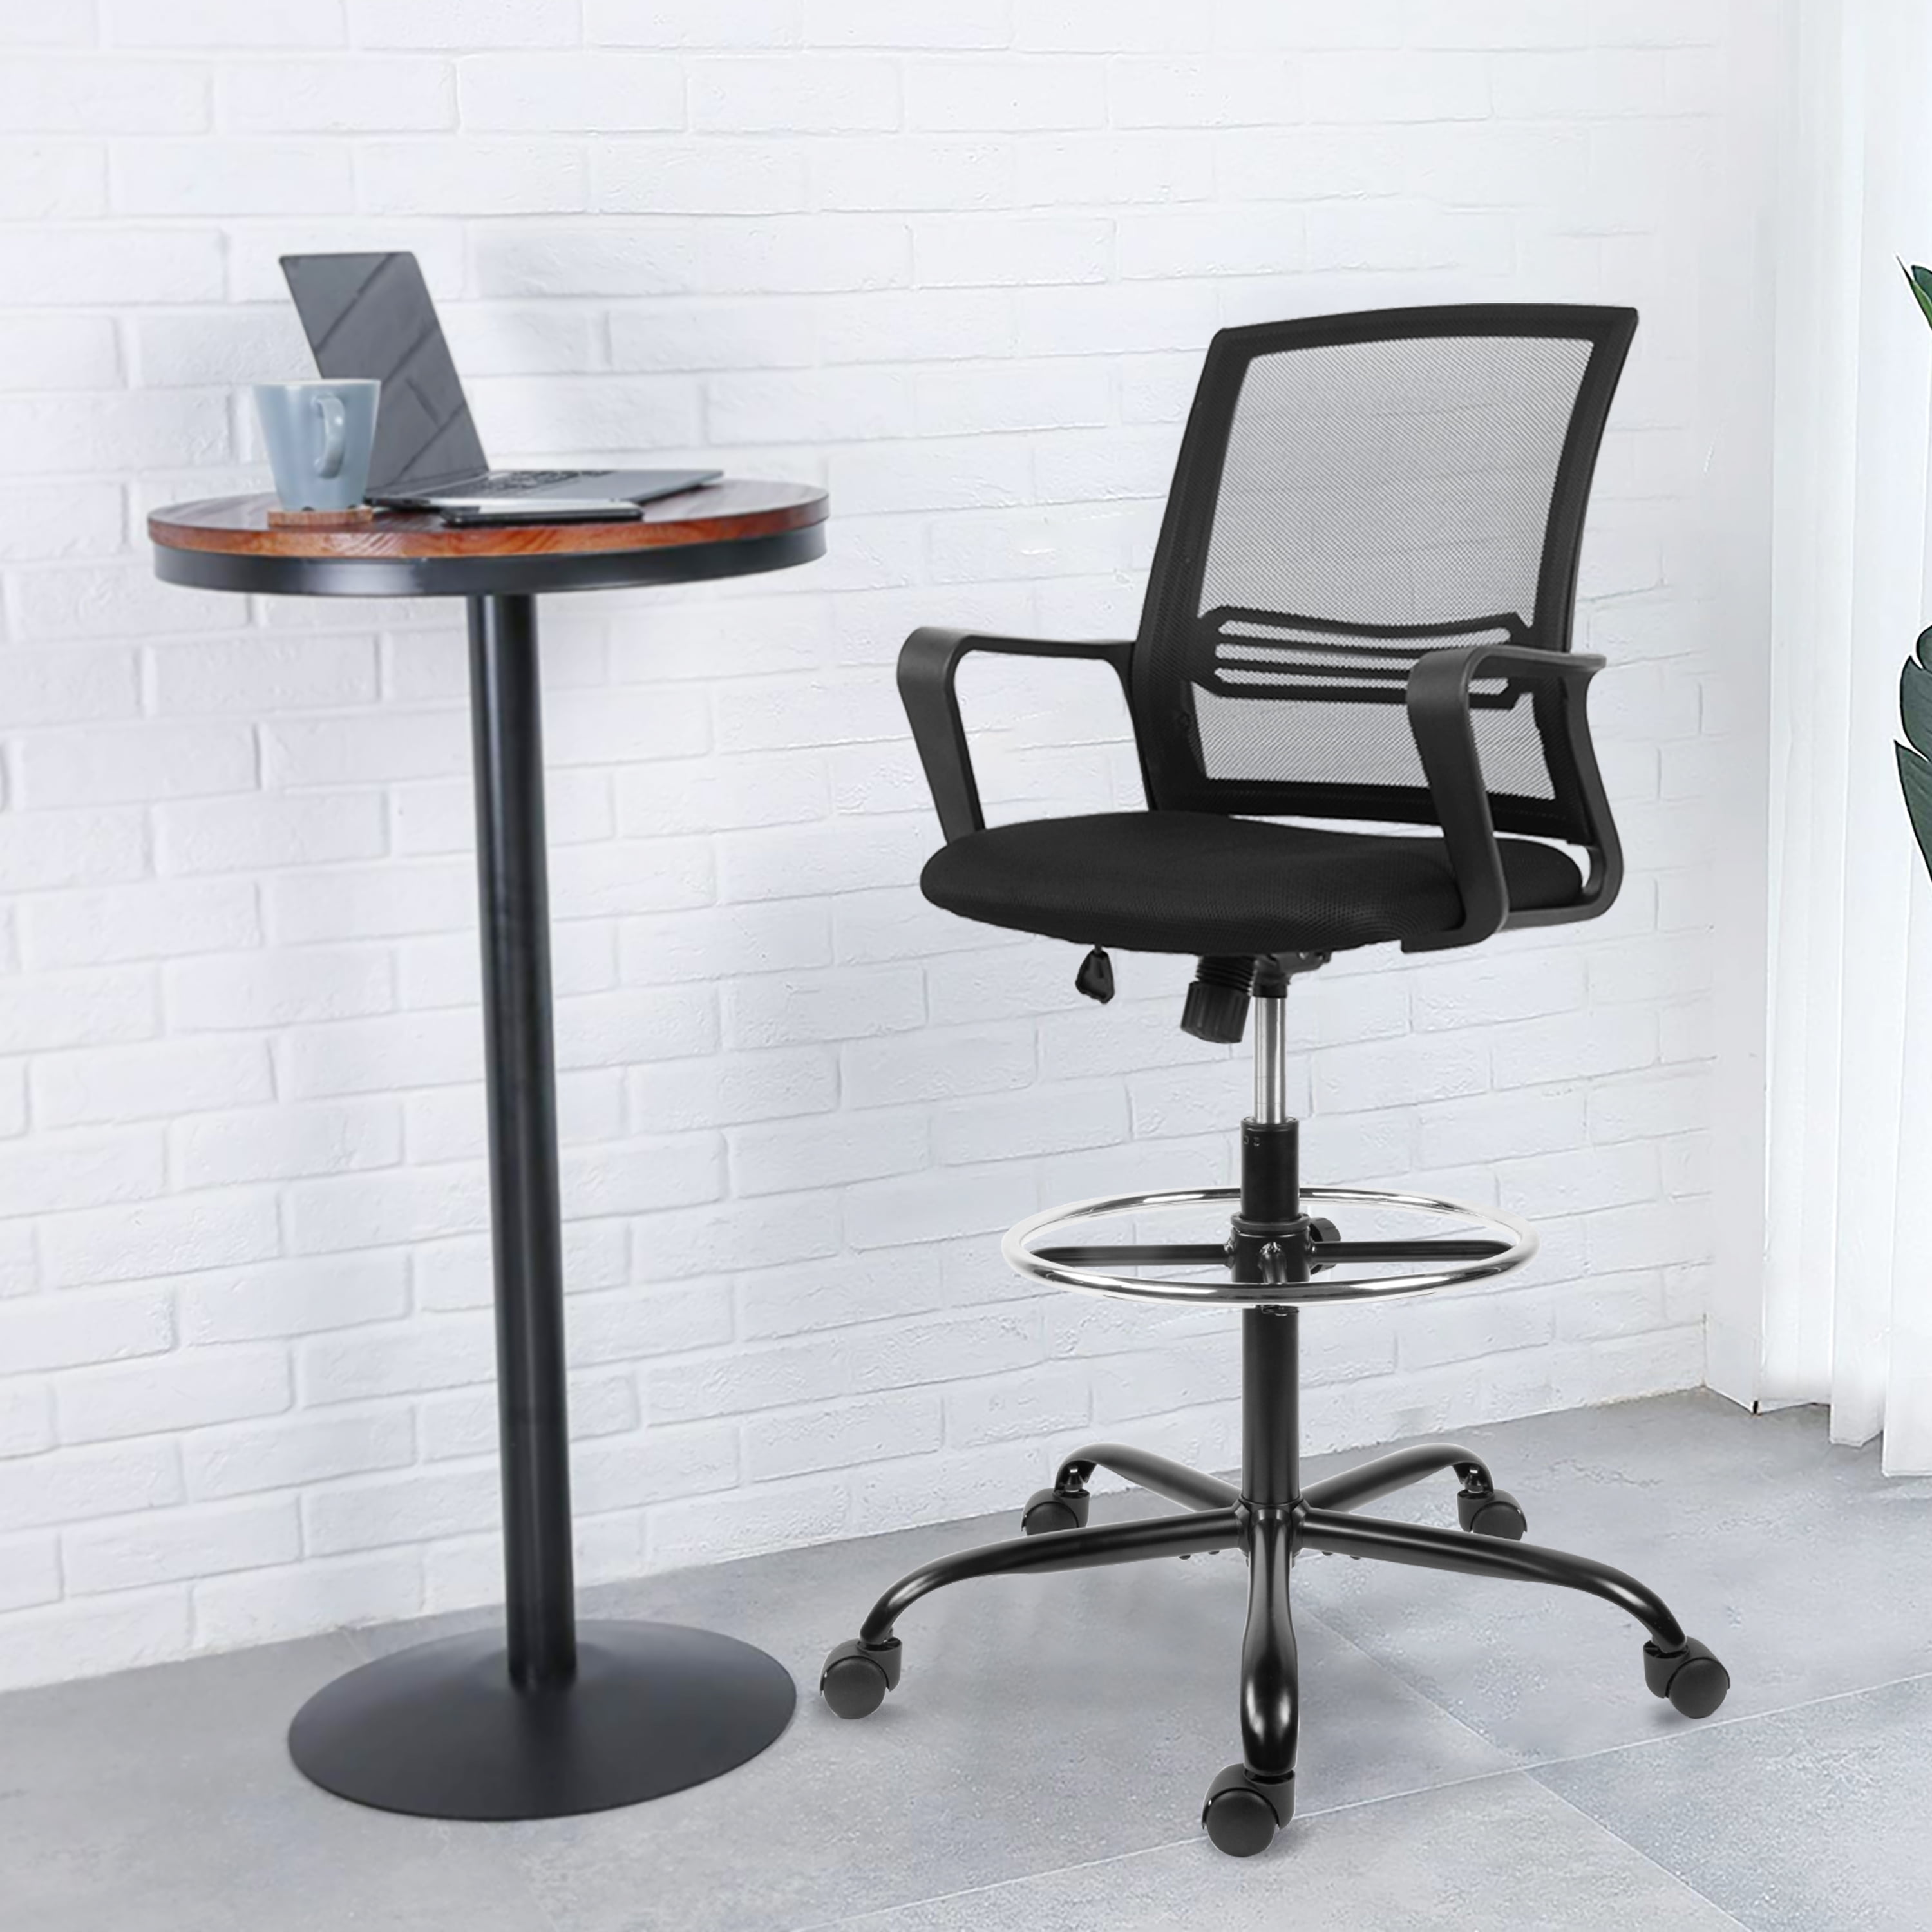 Drafting Chair Tall Office Chair For Standing Desk Drafting Mesh Table Chair With Foot Ring Walmart Com Walmart Com